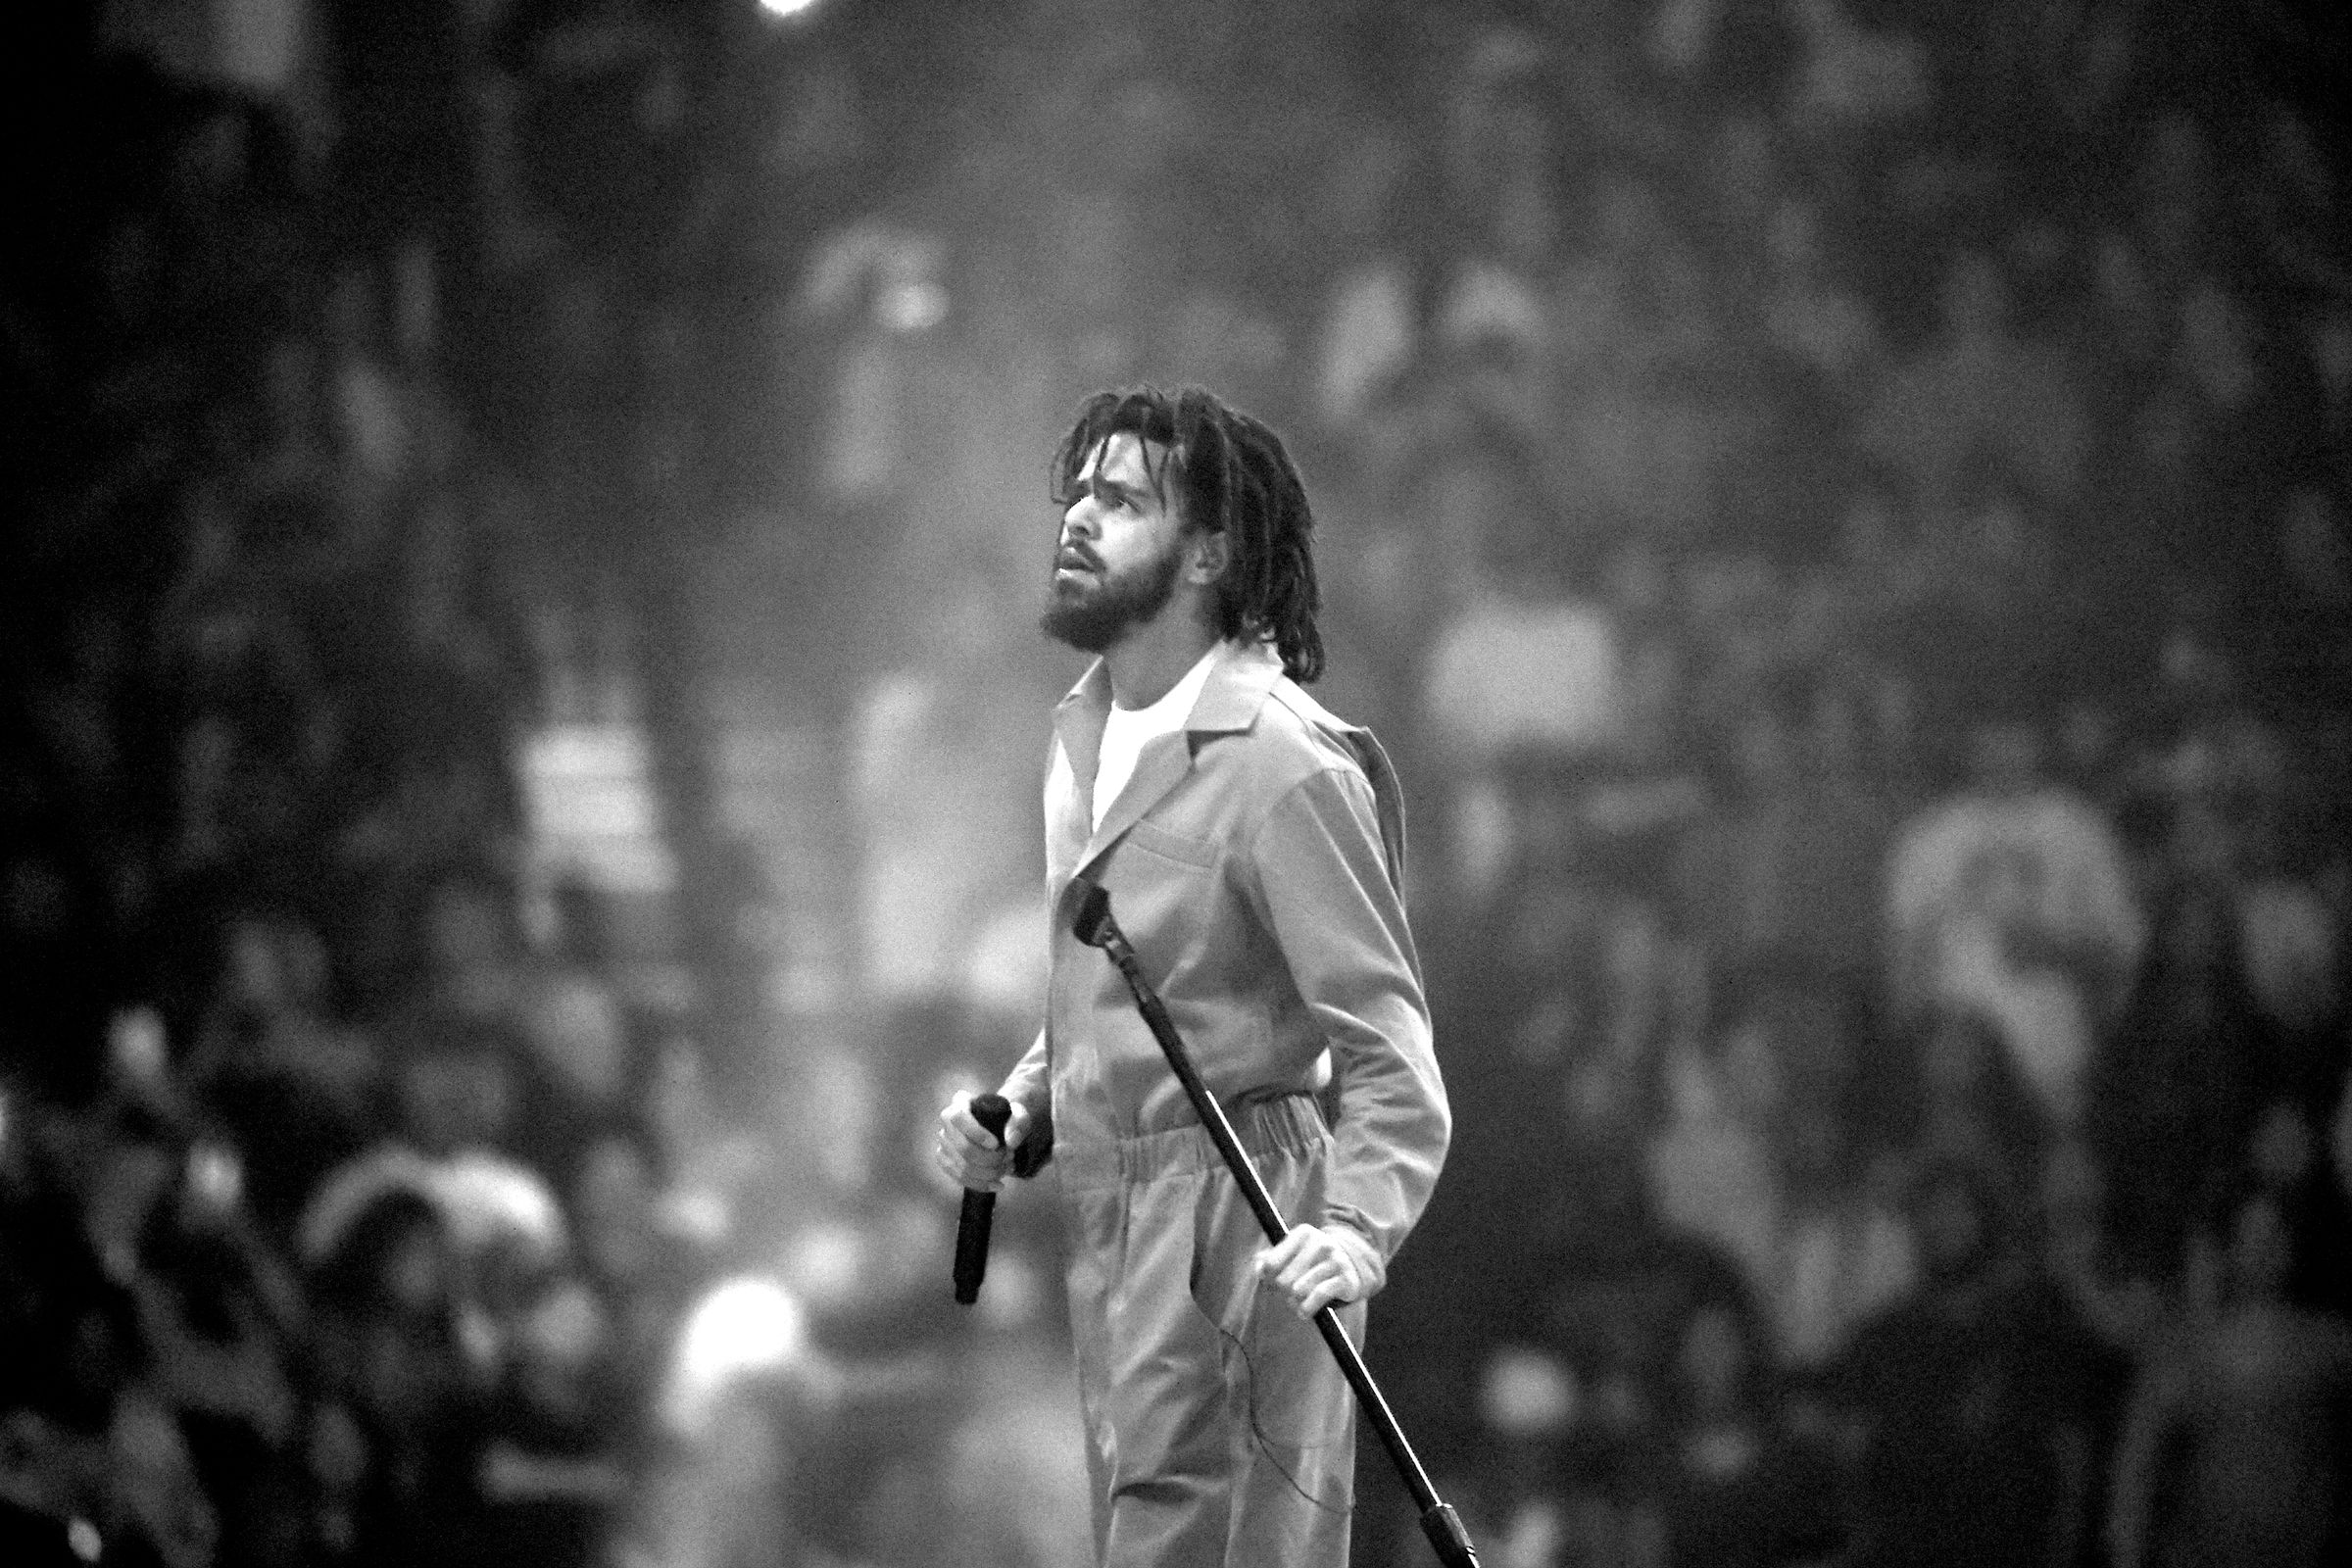 J. Cole In Concert - Brooklyn, New York